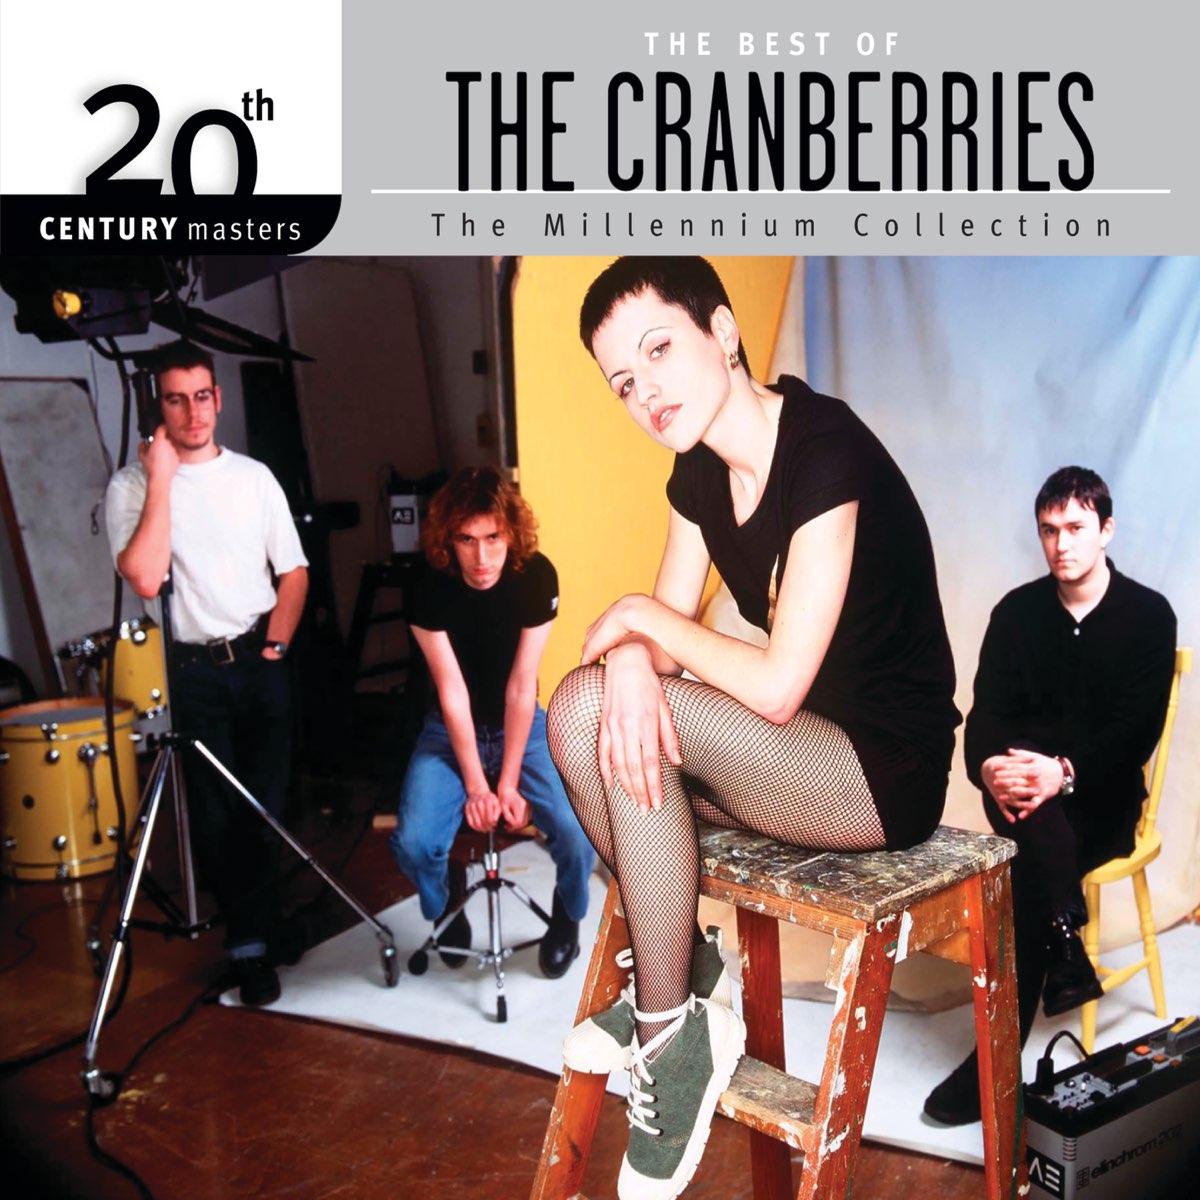 20th Century Masters - The Millennium Collection: The Best of the  Cranberries by The Cranberries on Apple Music